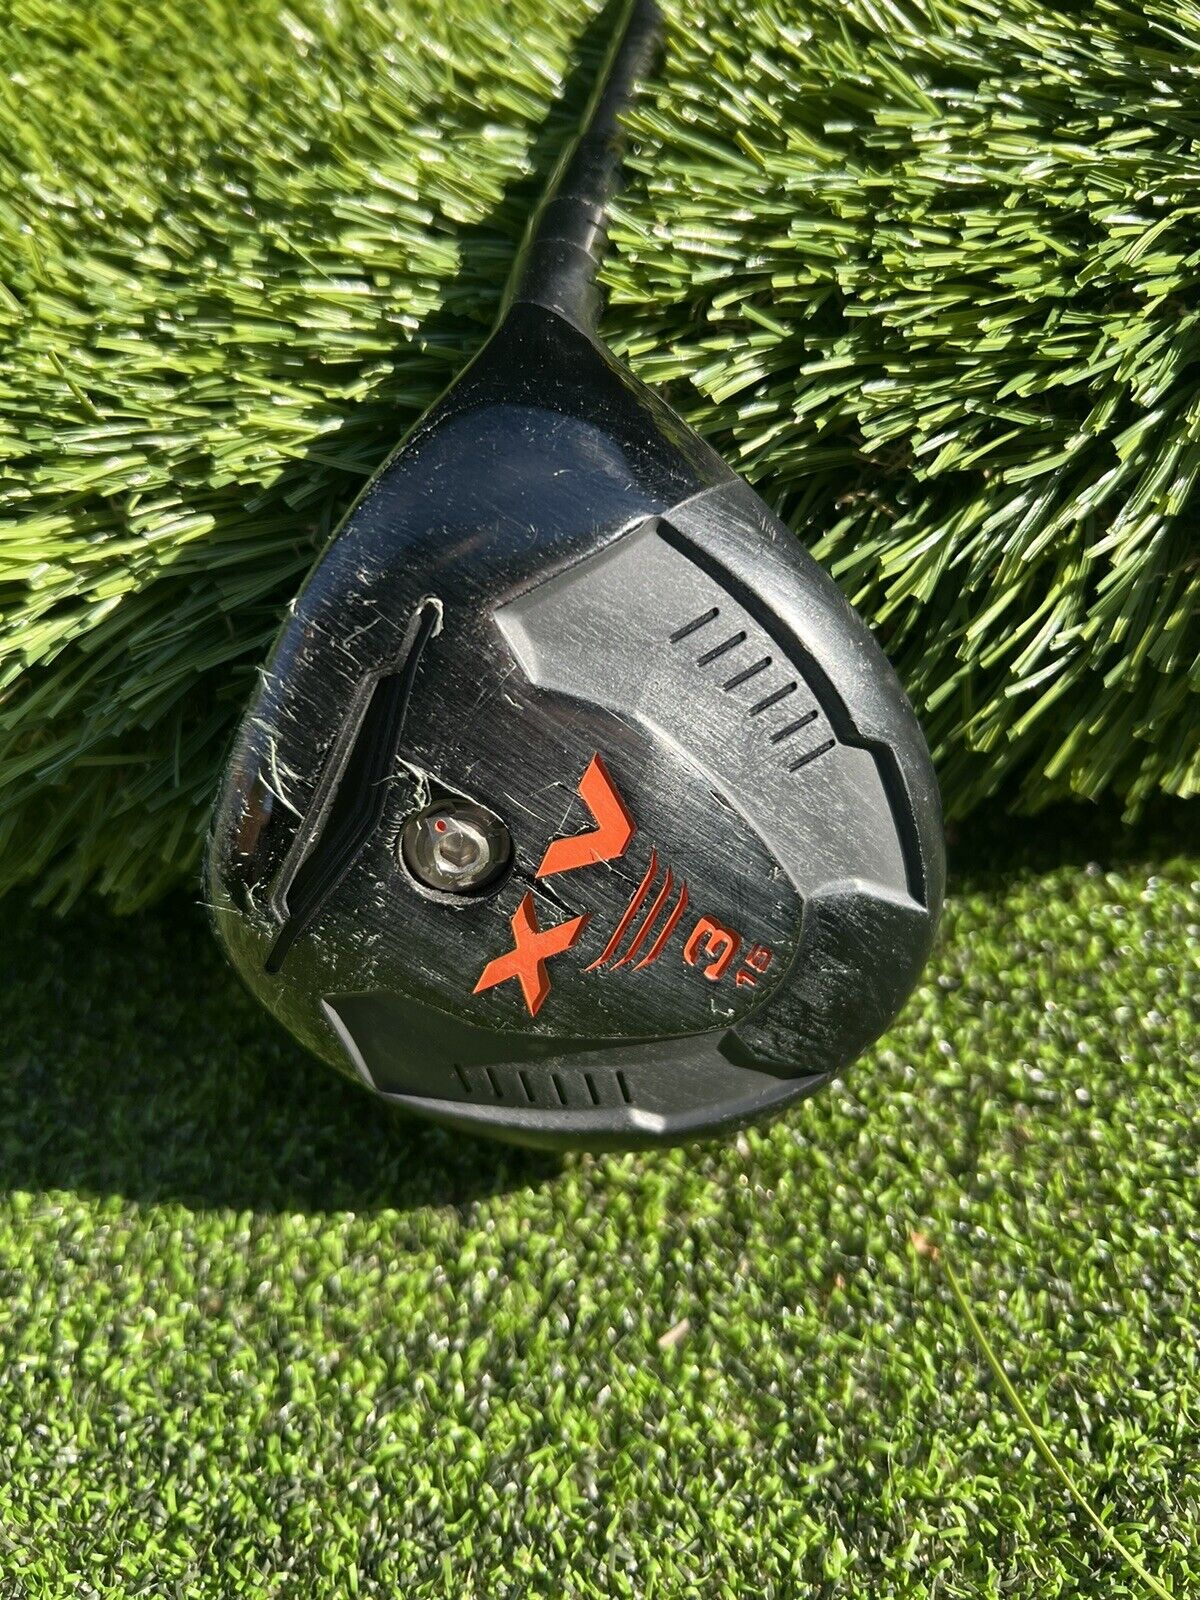 Acer XV 3 Wood With Swing Science 200 Series Shaft